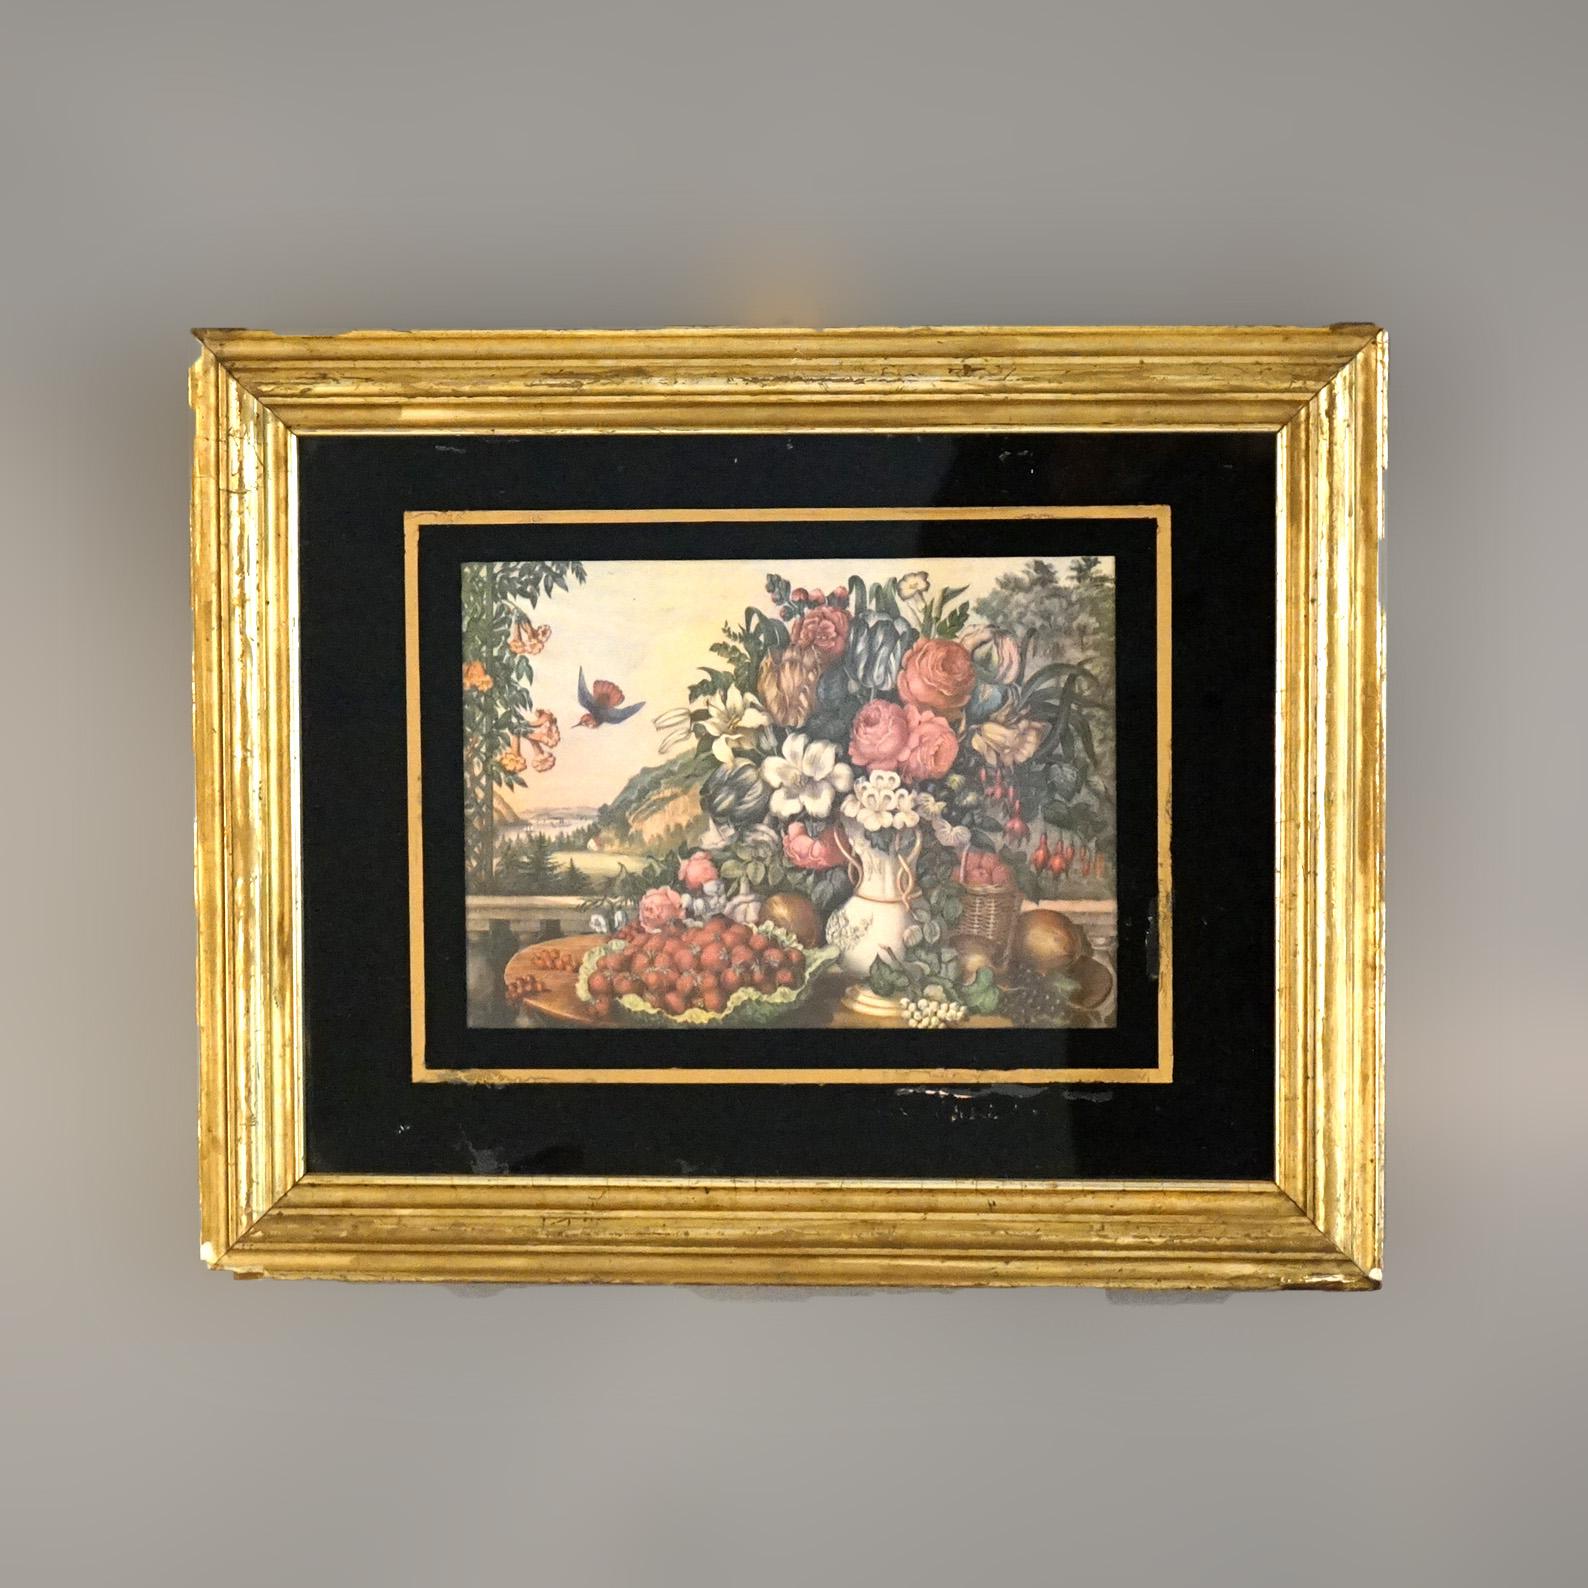 An antique floral still life print seated in the original giltwood frame with eglomise glass, C1840

Measures - 17.25